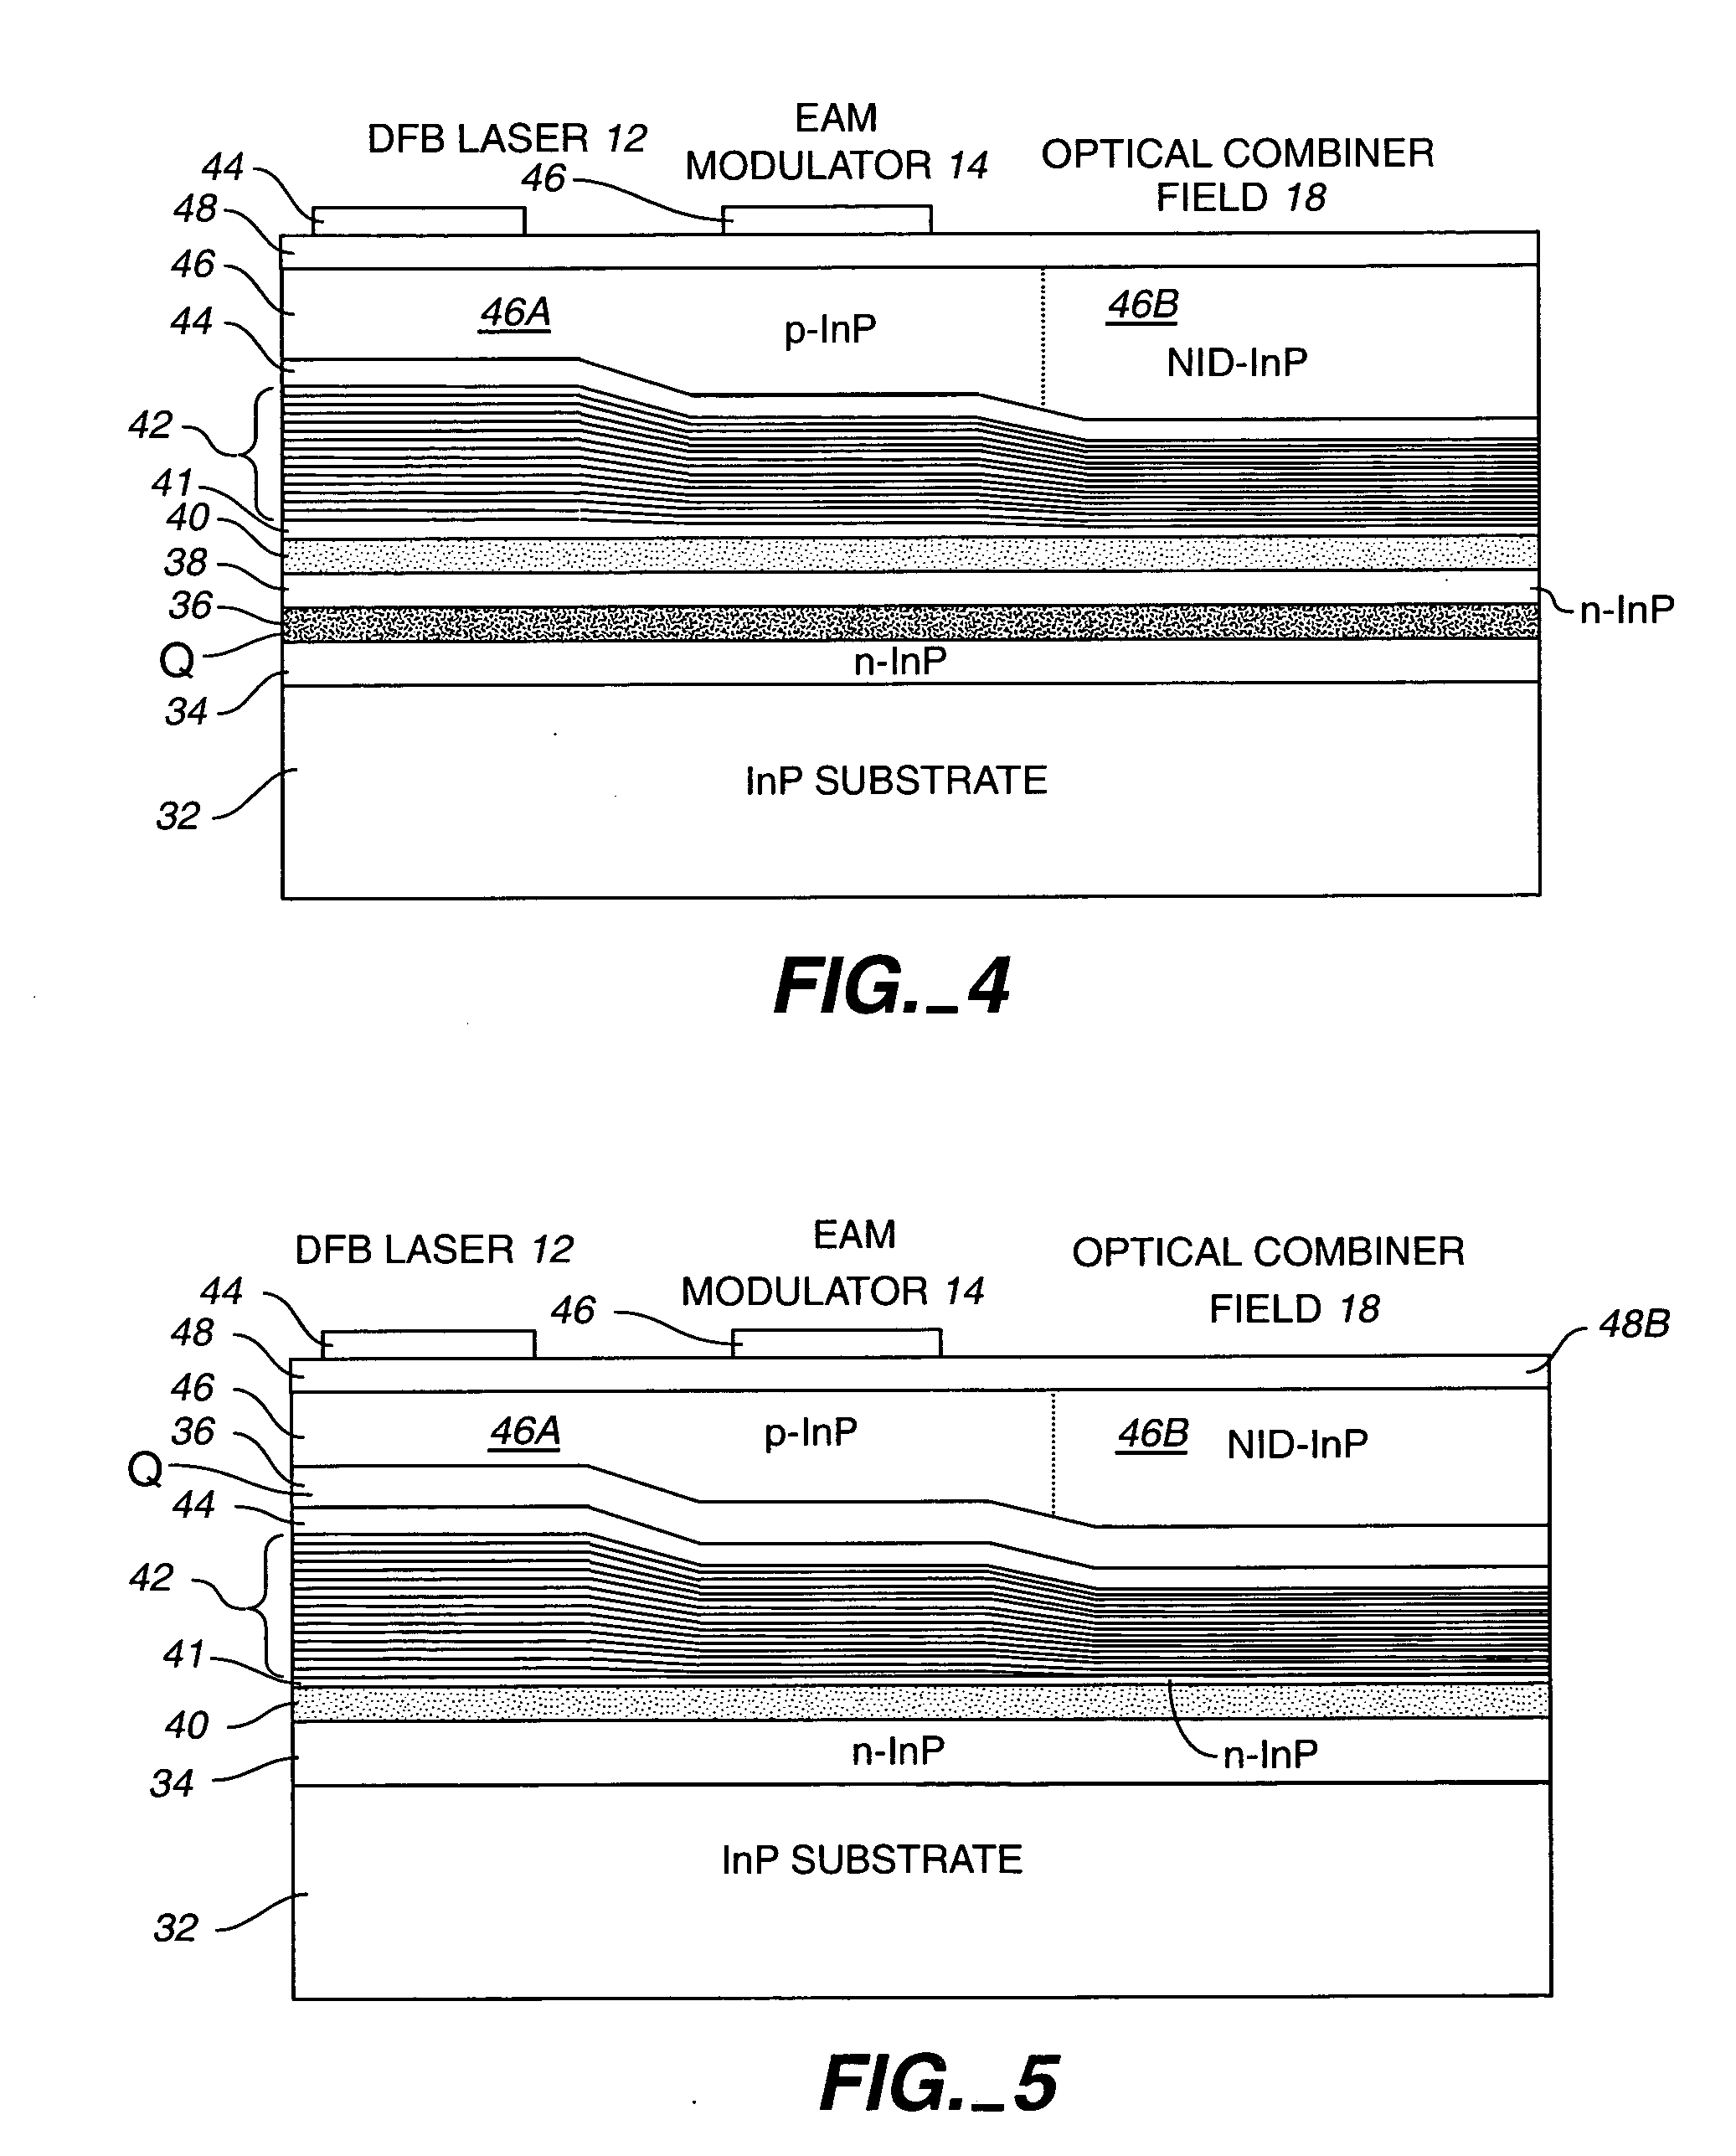 Method and apparatus for providing an antireflection coating on the output facet of a photonic integrated circuit (PIC) chip